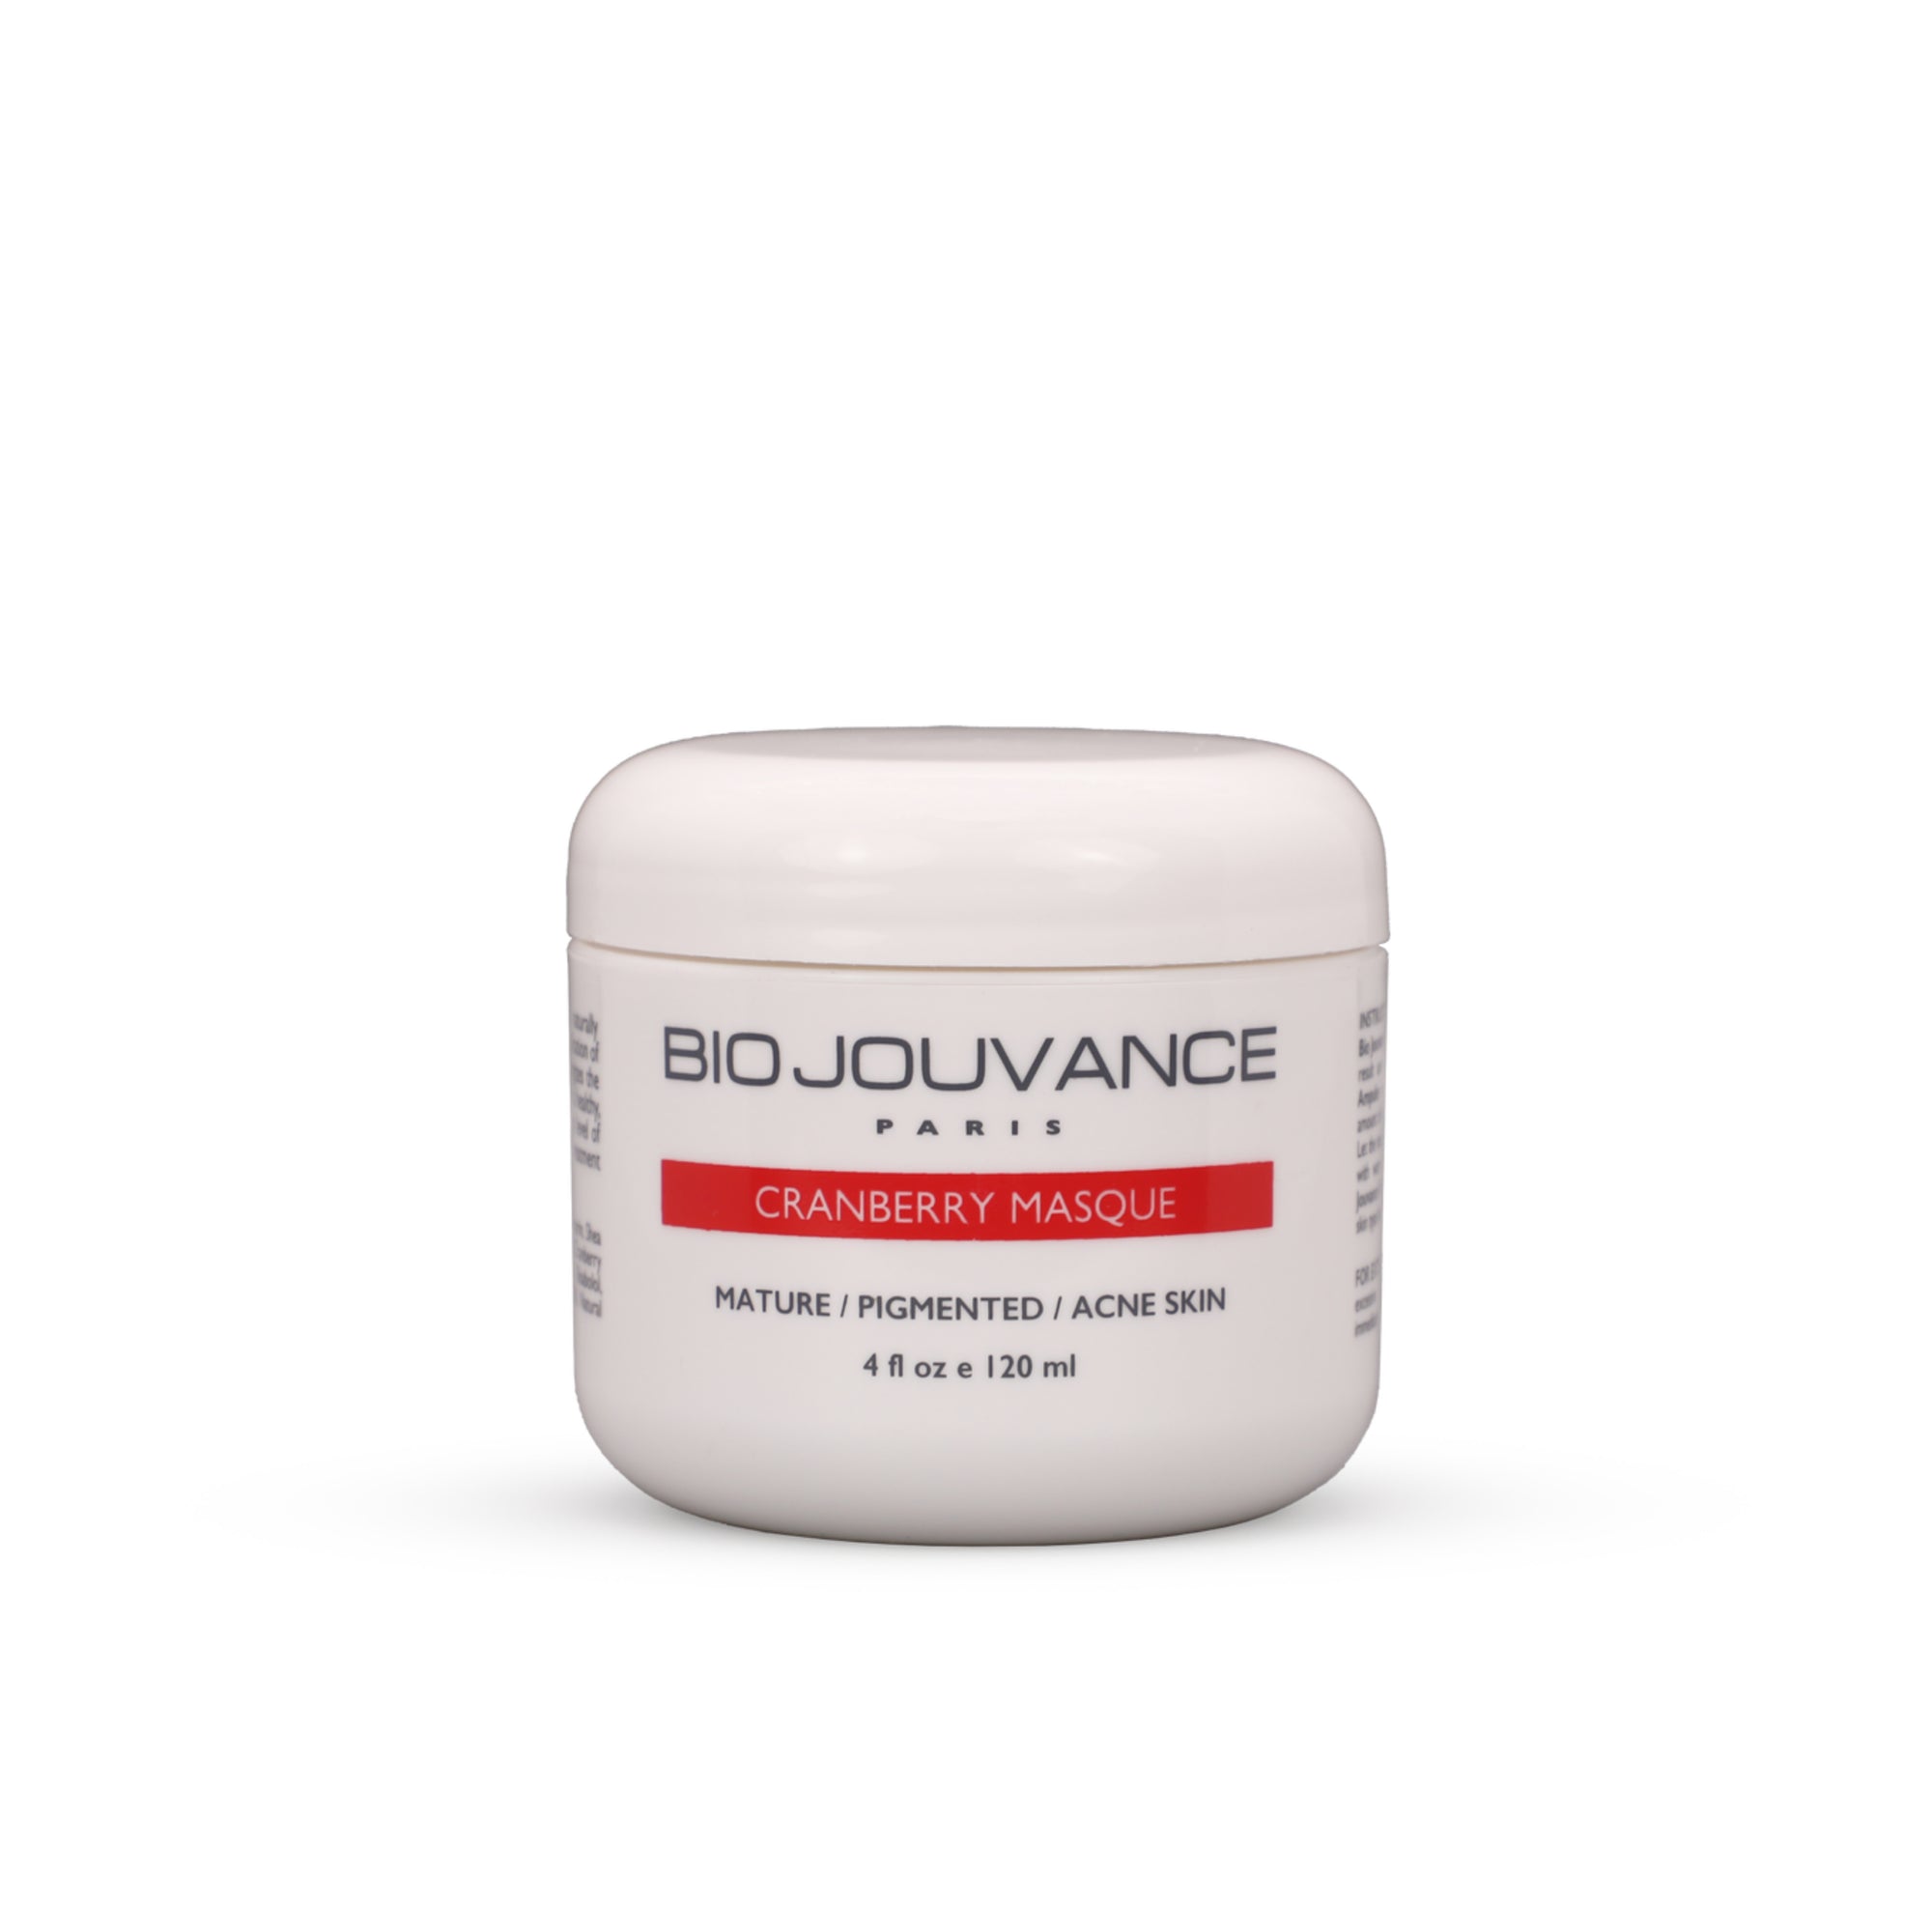 BioJouvance Paris Cranberry Mask for Mature, Acne, and Pigmented Skin.